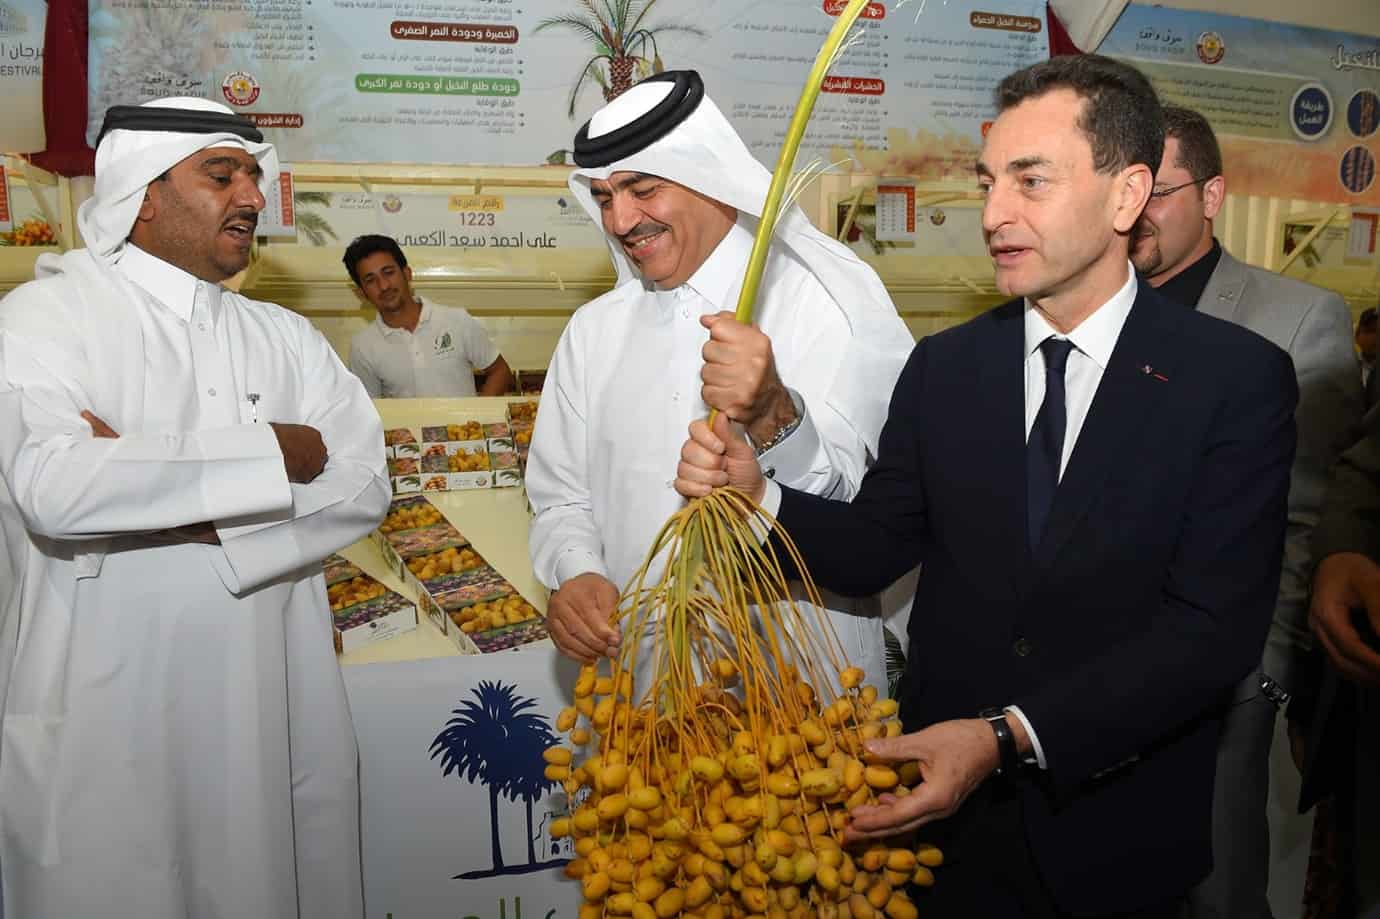 Local dates festival attracts thousands of visitors